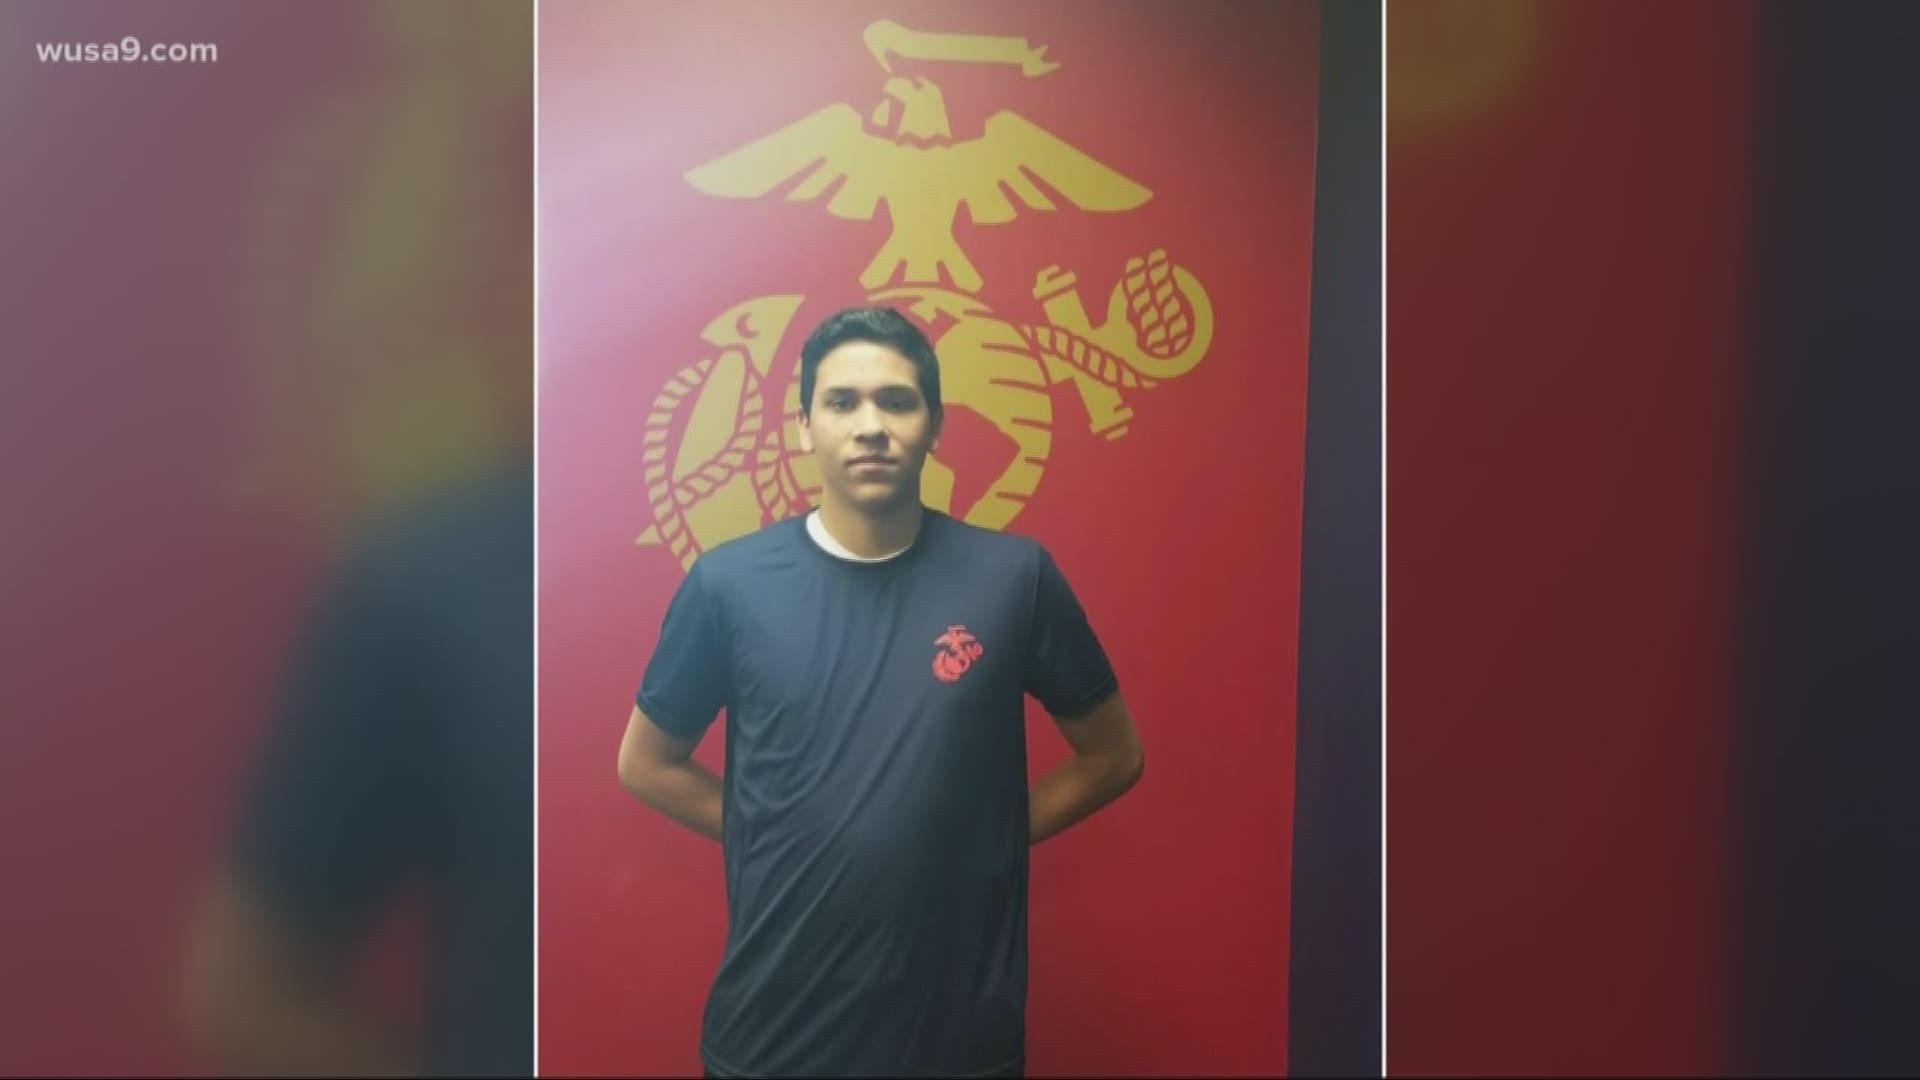 A future Marine recruit has died -- days after completing a physical fitness test at the Marine recruiting station in Frederick, Maryland. 18-year-old Jose Rodriguez was set to attend boot camp next month at Parris Island in South Carolina. Last Wednesday, he completed a strength test that includes pull-ups, crunches and a mile-and-a-half run -- then he suffered a medical emergency.
Rodriguez died two days later.